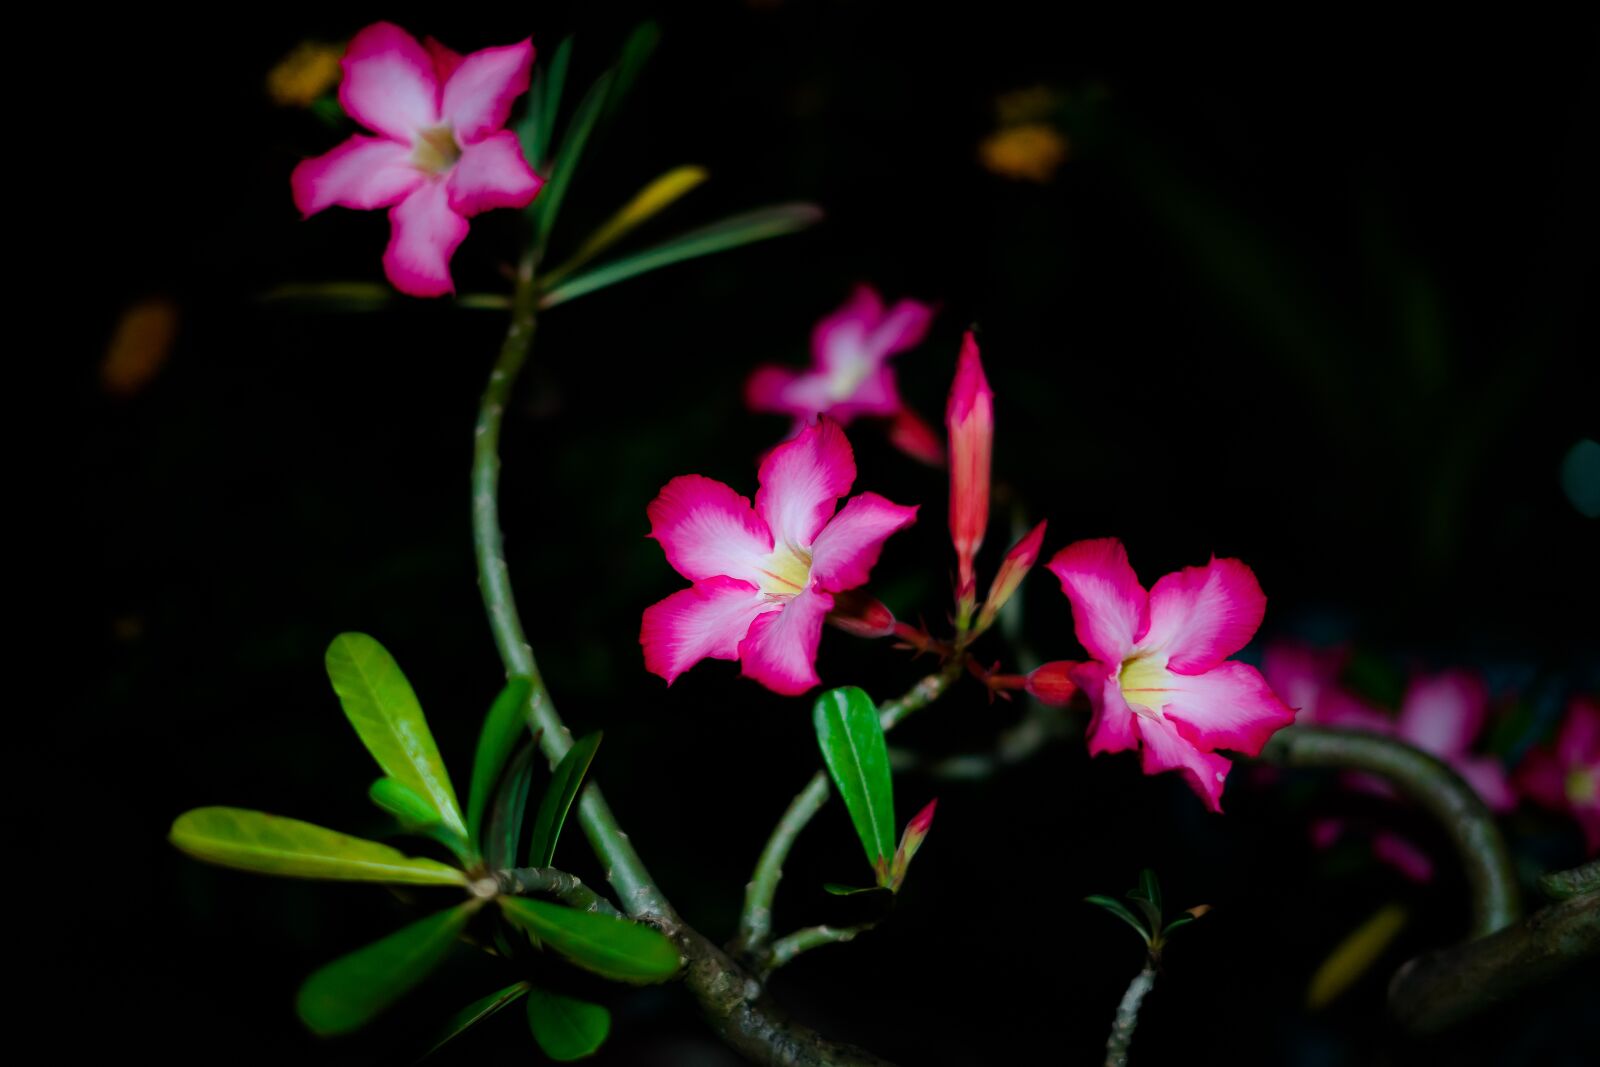 Sony a7 II sample photo. Flower, night, nature photography